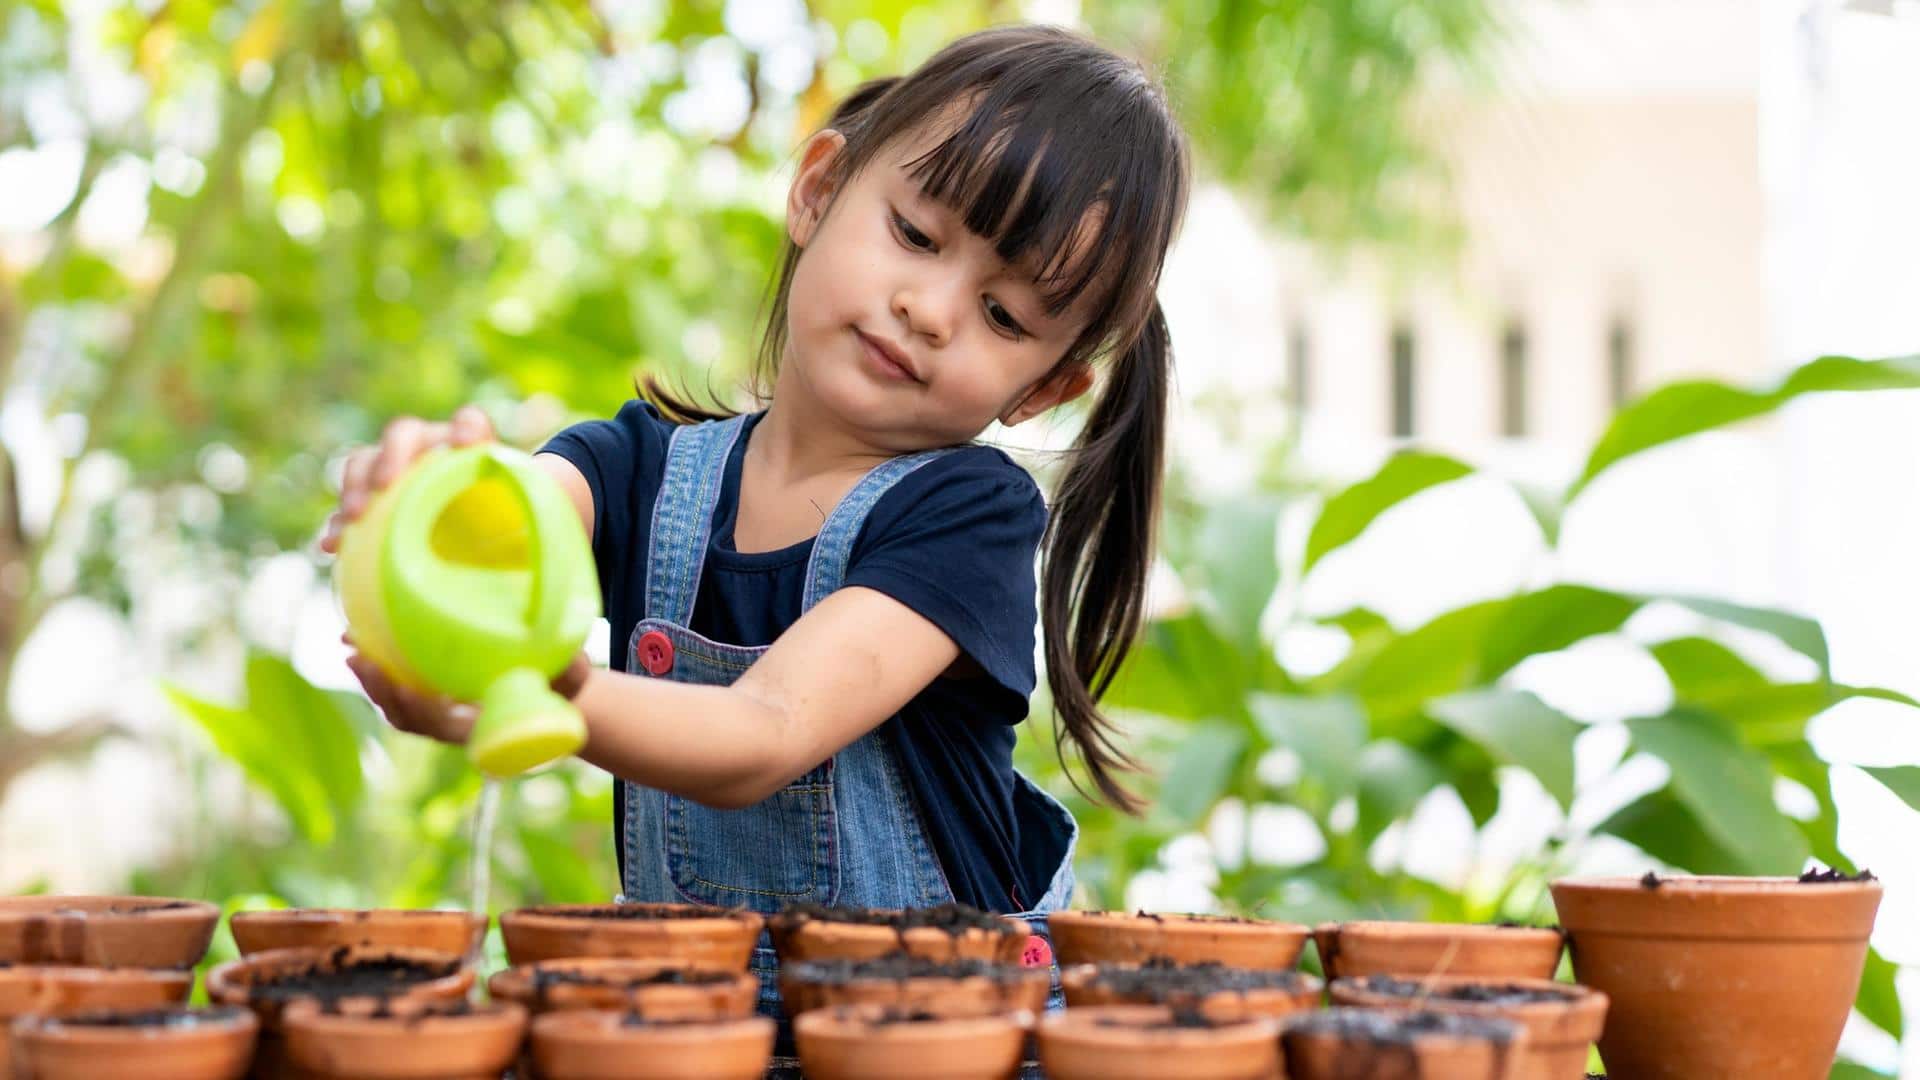 Eco-friendly activities to get kids excited about nature